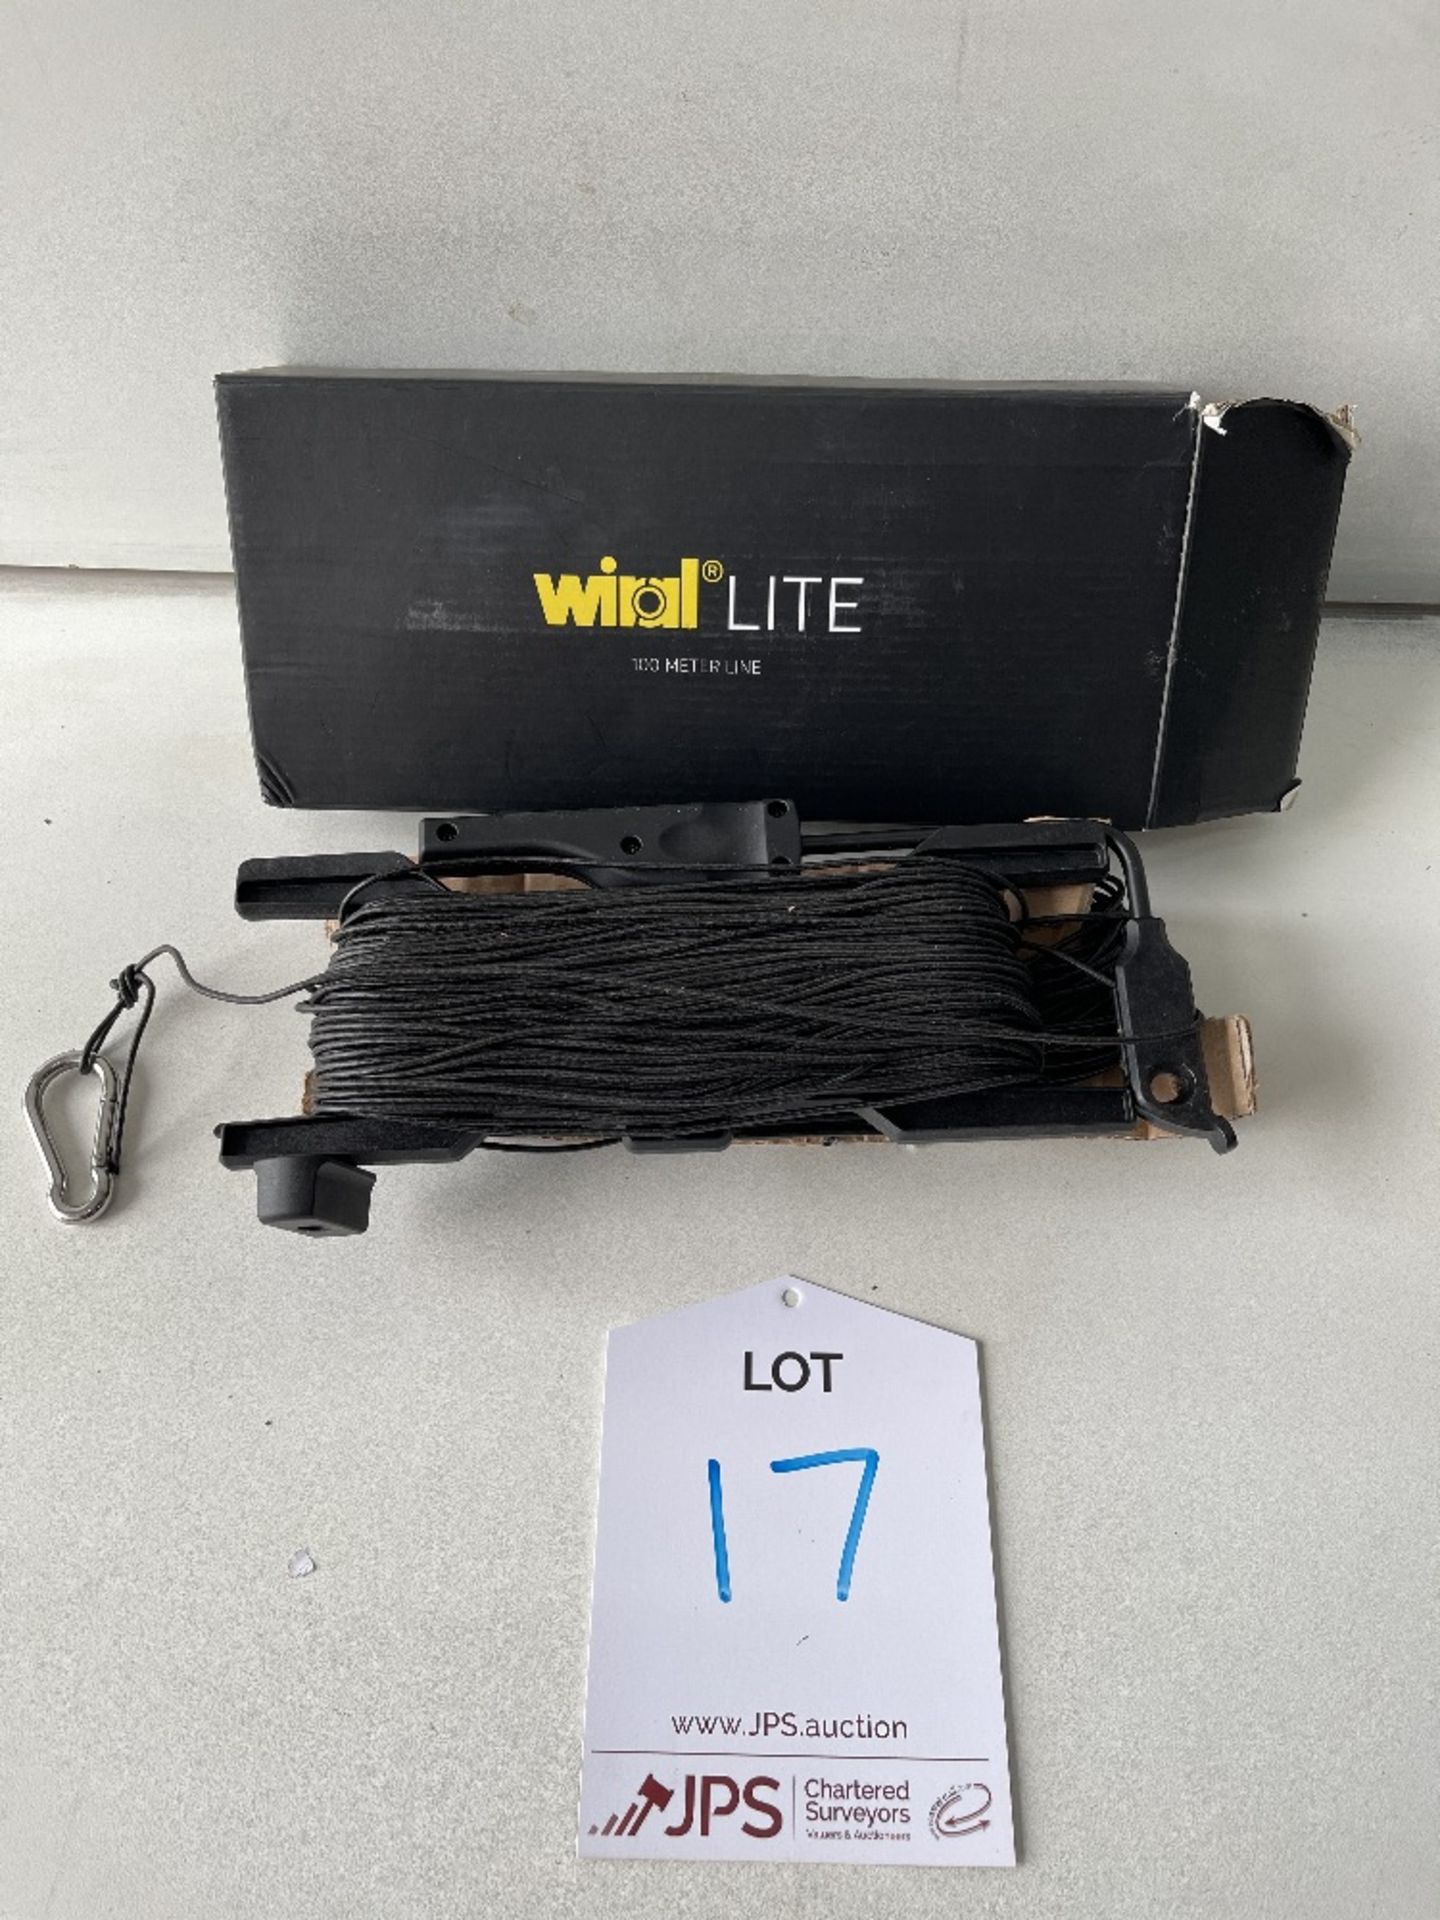 Wiral Lite 100 meter line spare cable - Image 2 of 2